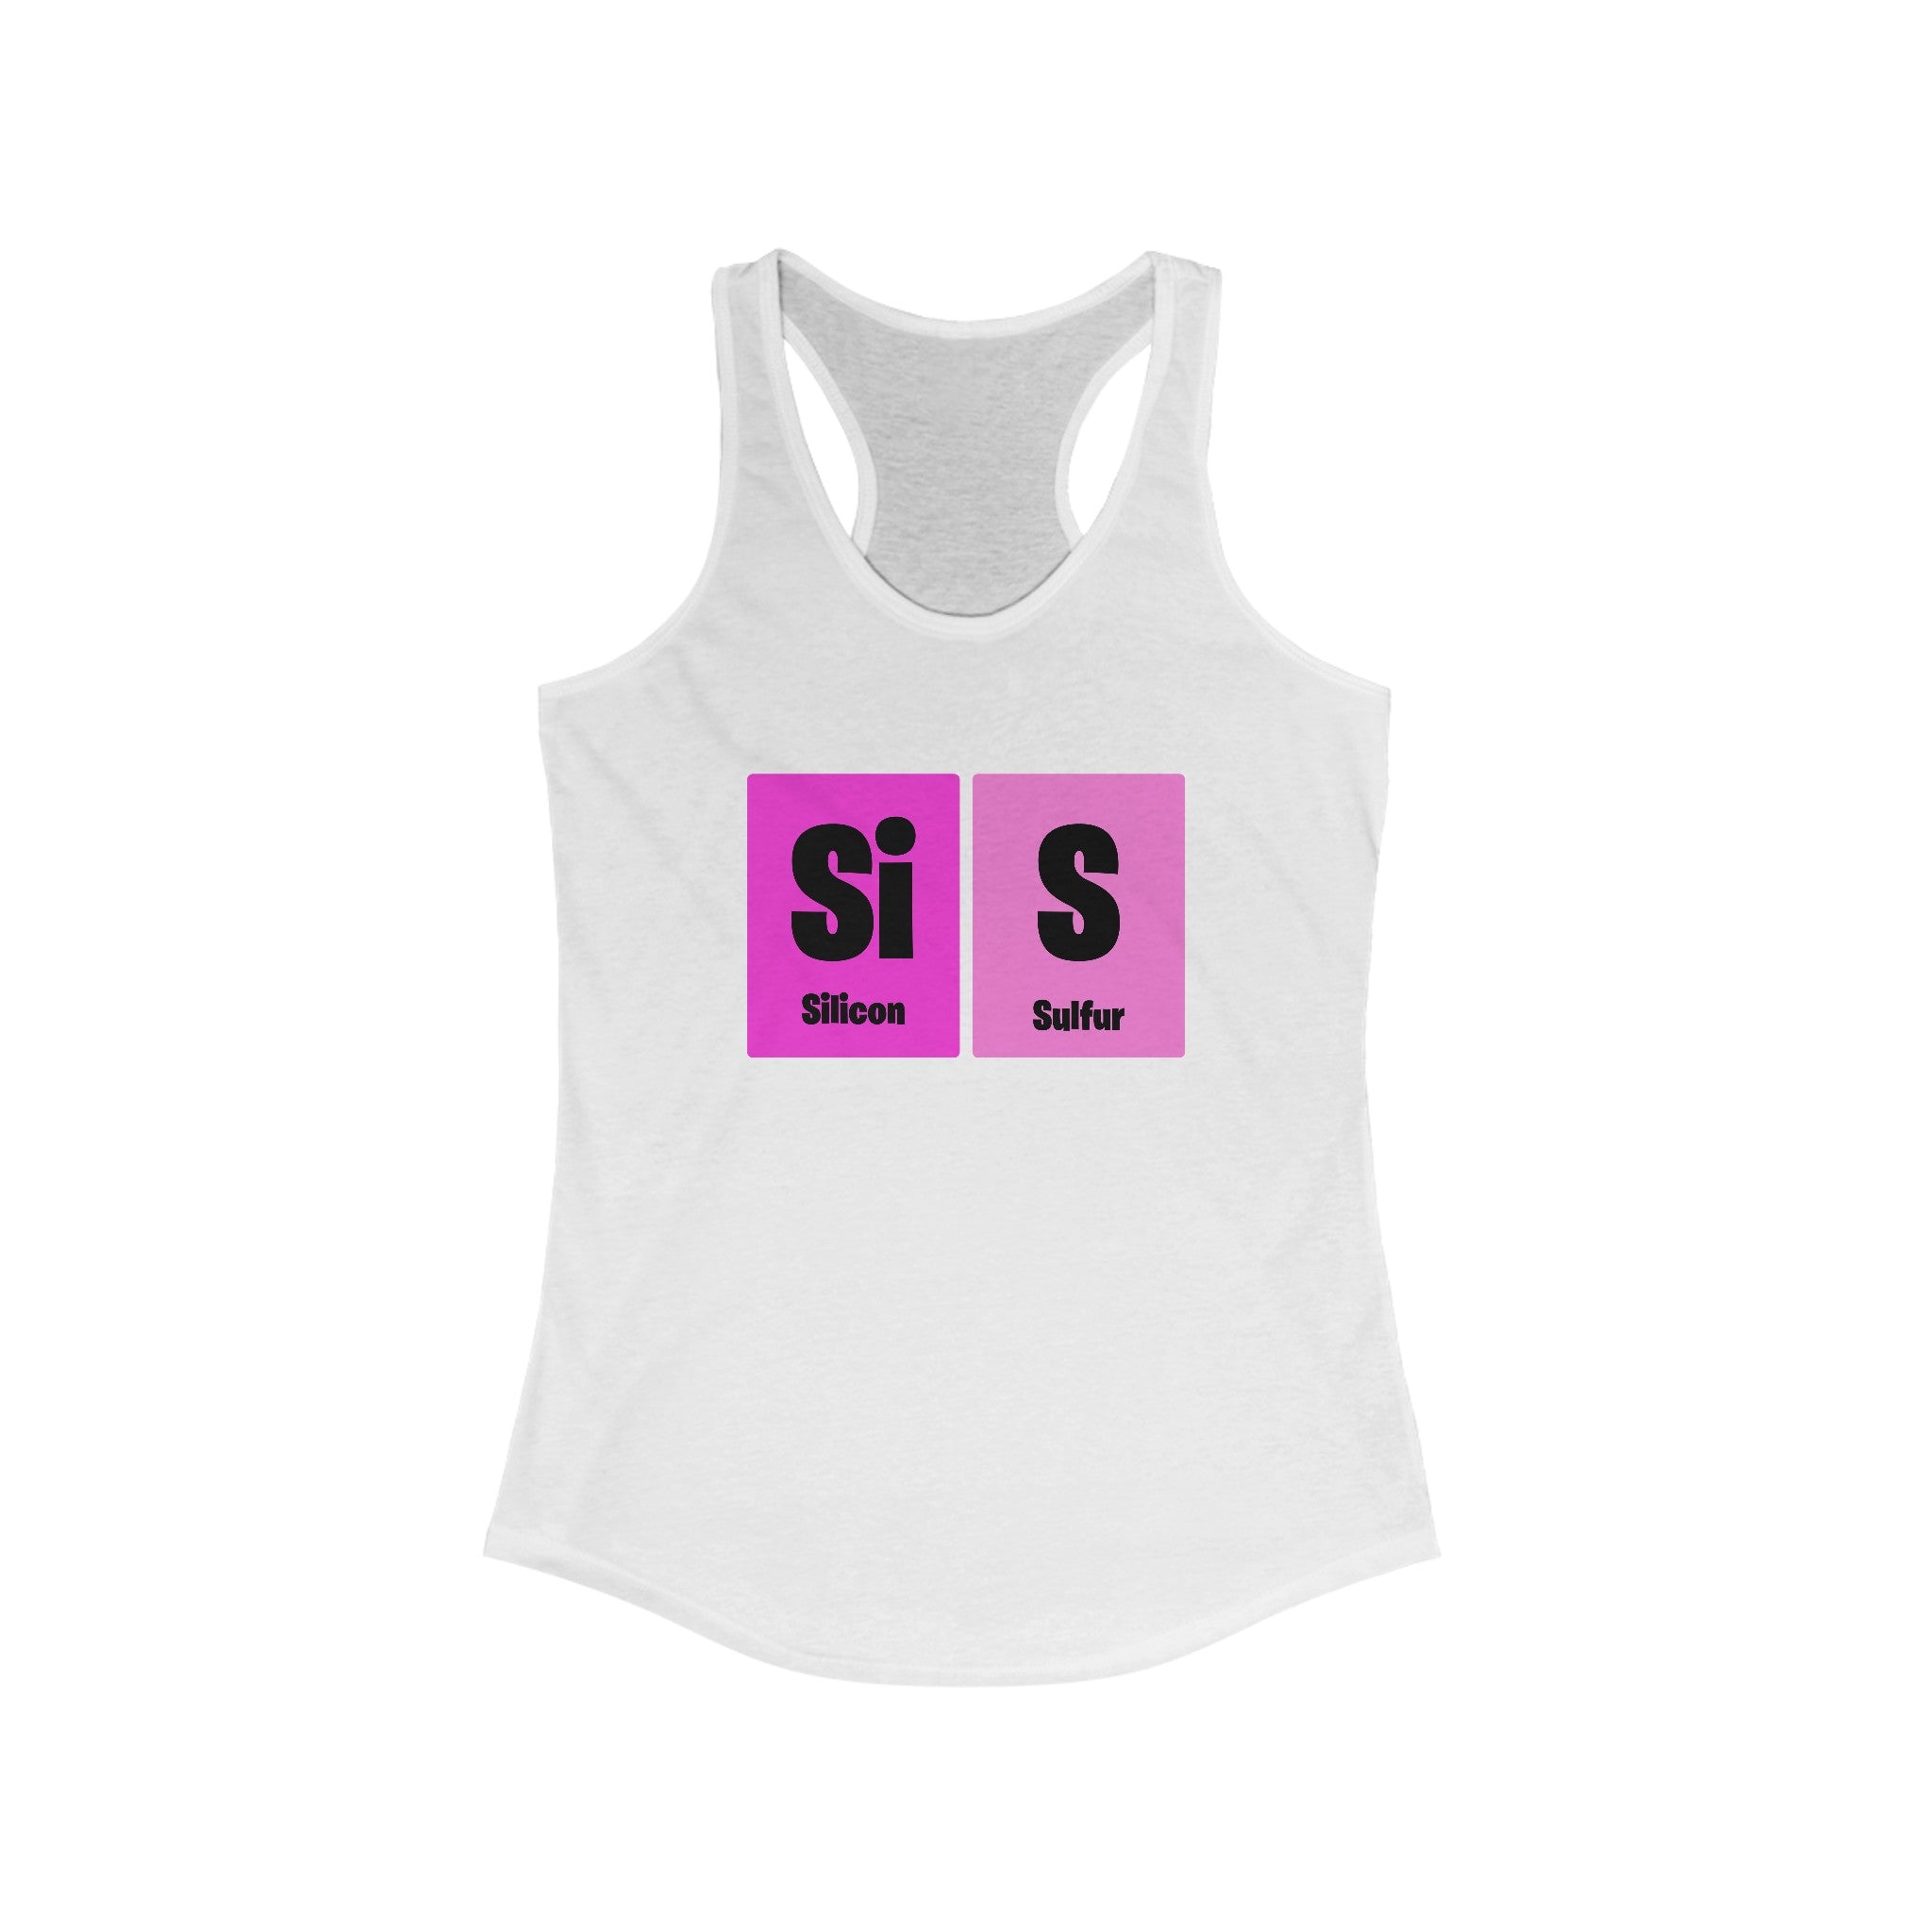 Si-S Light Pendant - Women's Racerback Tank featuring the chemical symbols for Silicon (Si) and Sulfur (S) on a gradient purple-pink background, perfect for an active lifestyle.